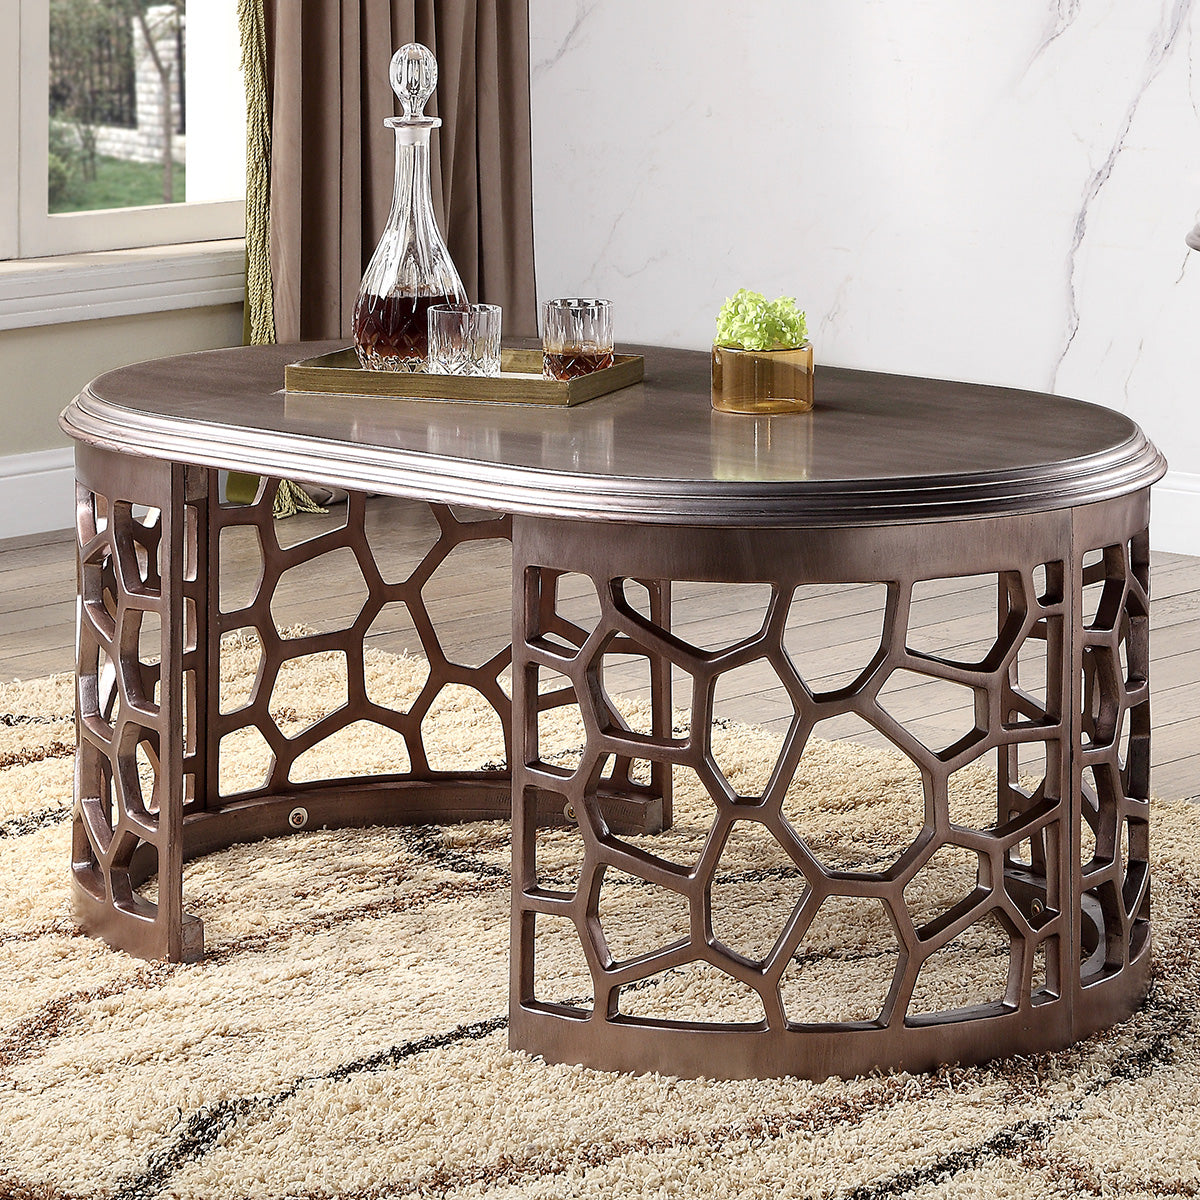 Homey Design HD-8912D - 3PC COFFEE TABLE SET - New Star Living